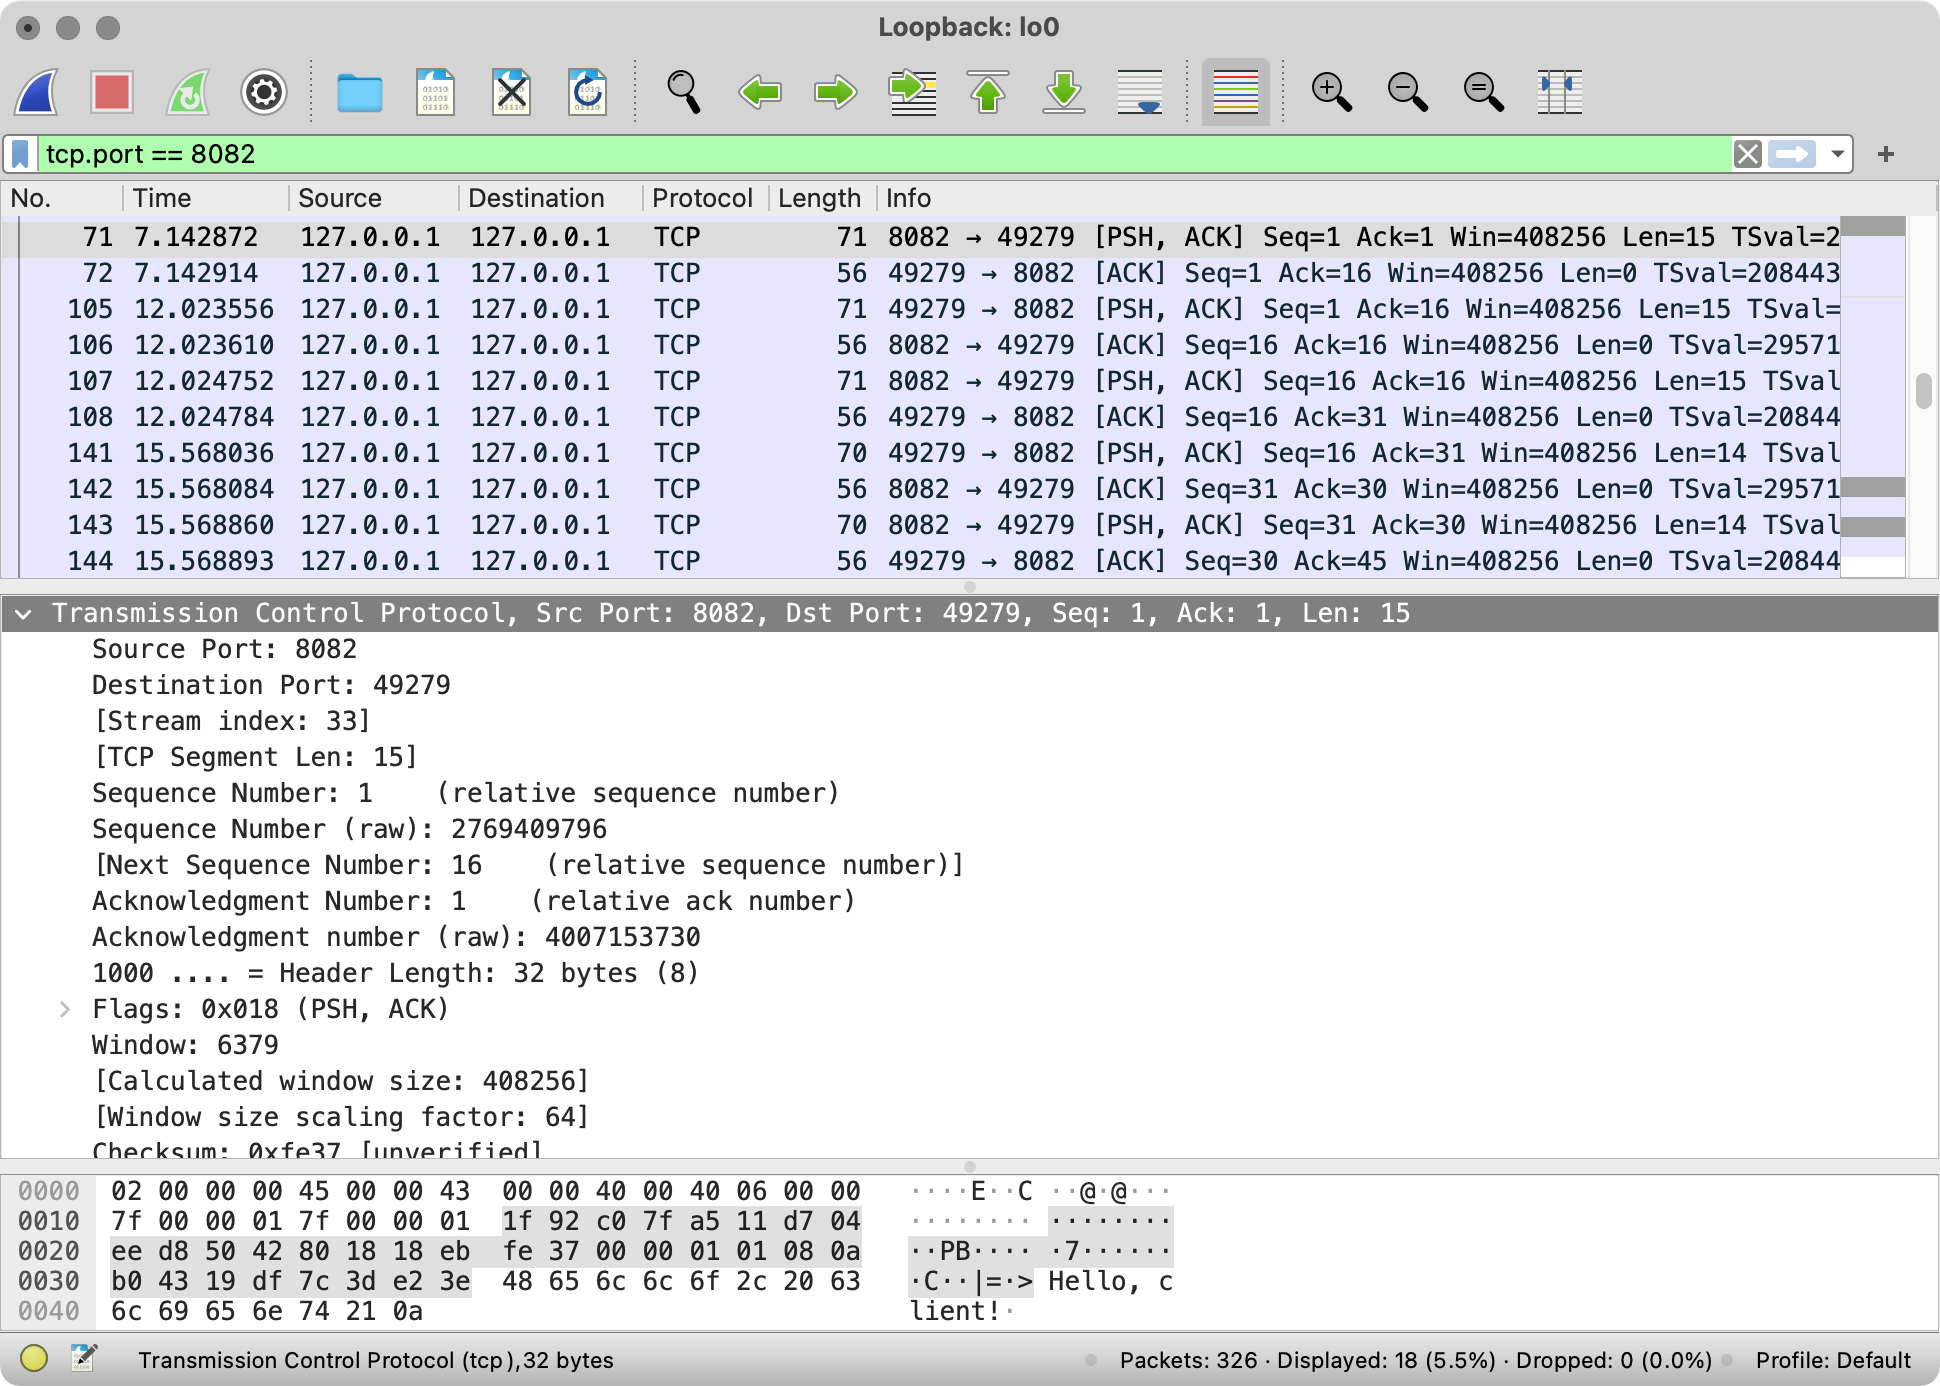 Example of a segment carrying payload in the Wireshark log